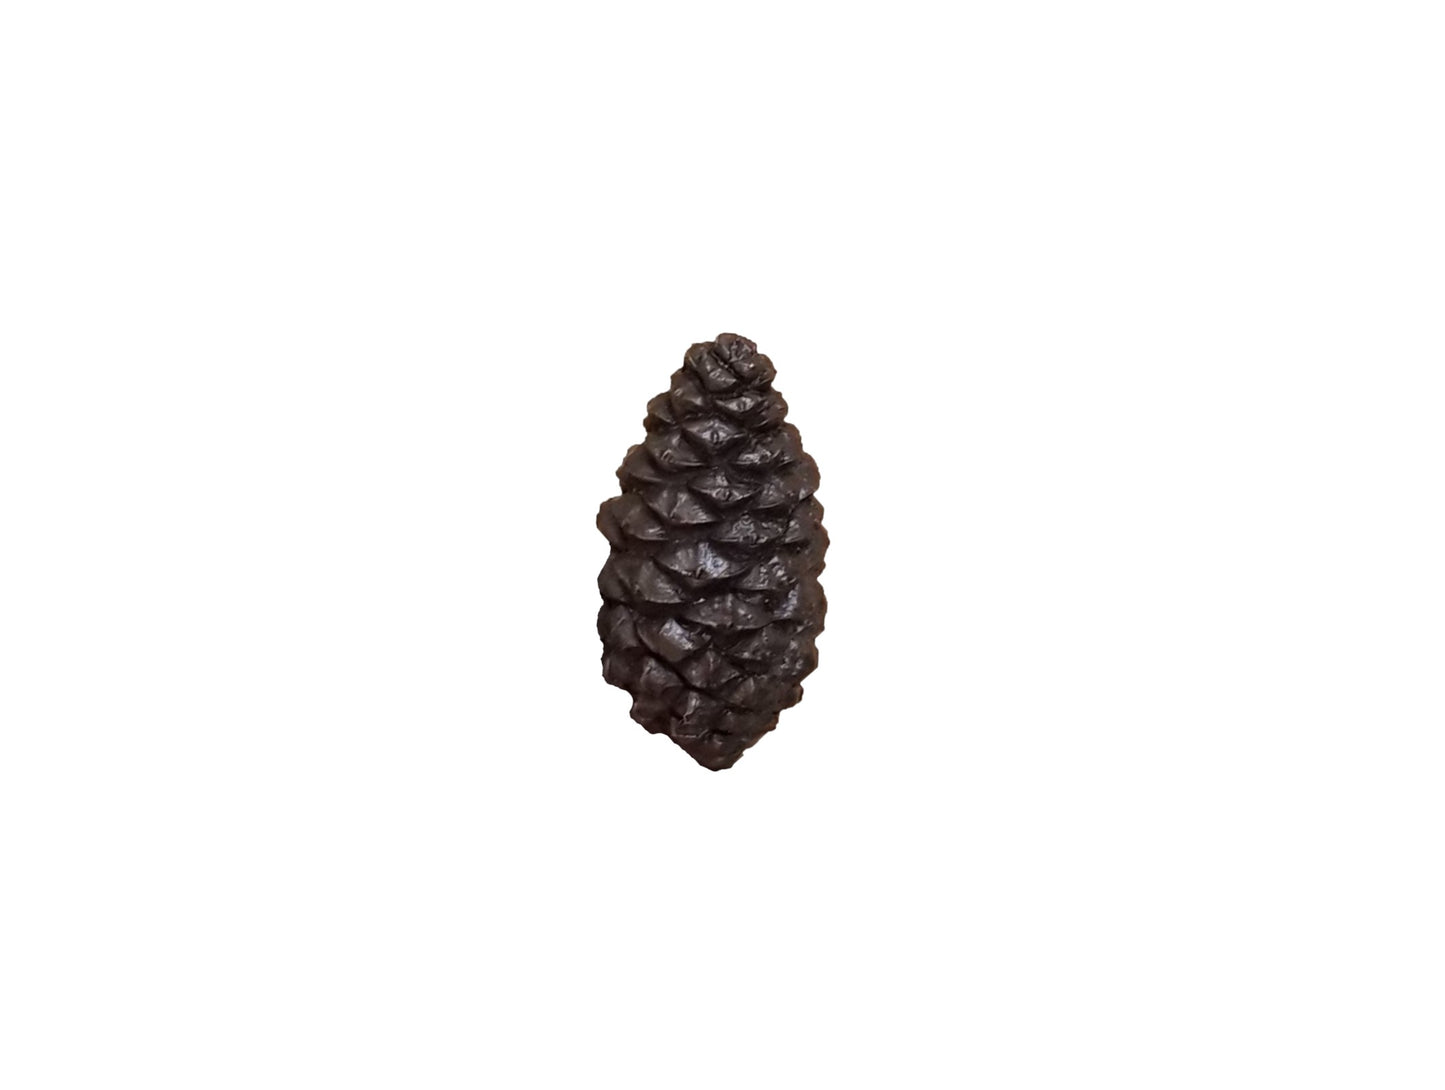 Pine Cone cabinet knob made of solid bronze